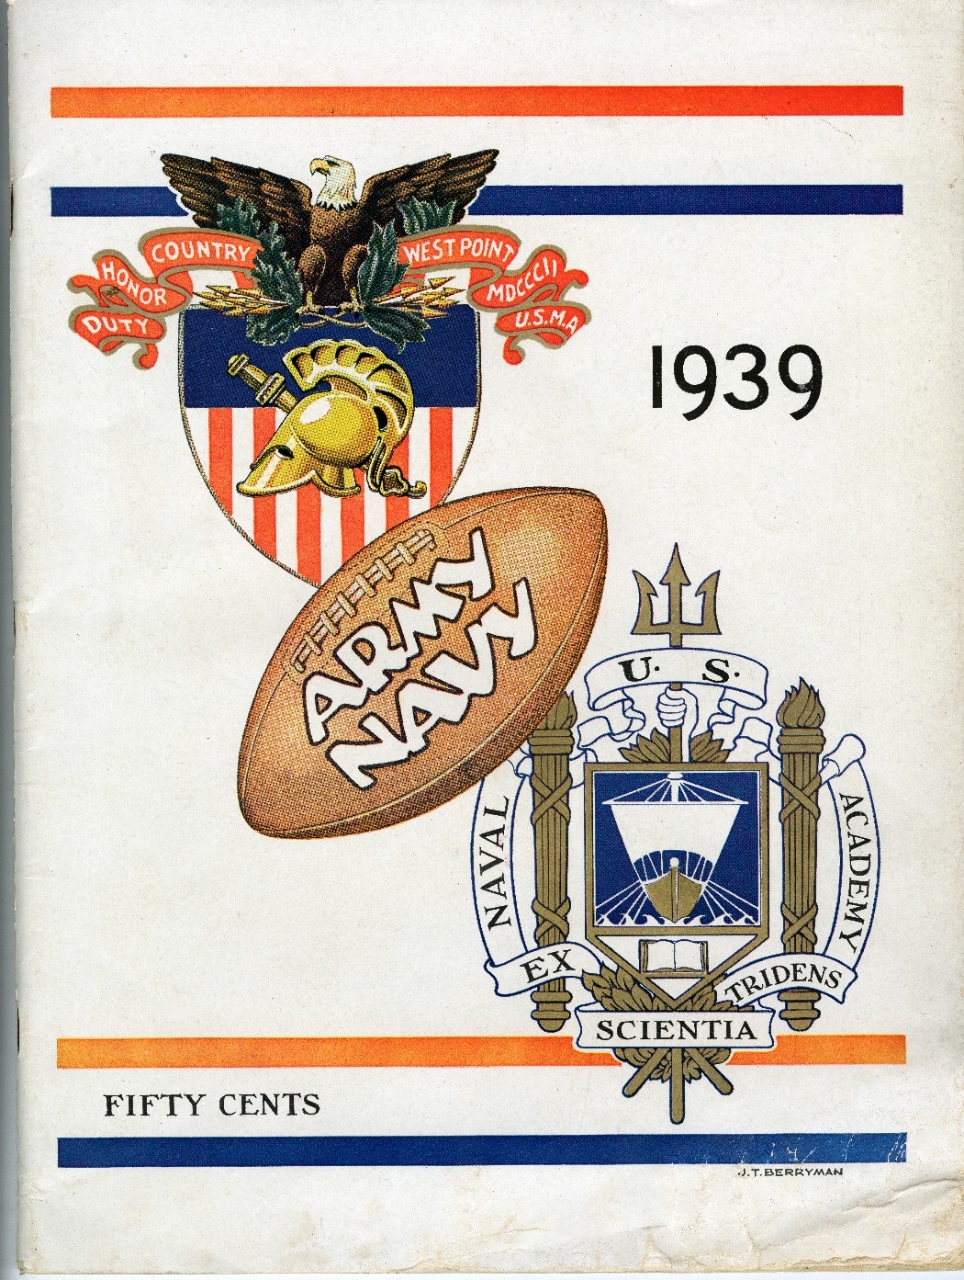 Cover of the Army-Navy football game program, dated December 2, 1939. Program has school seal from West Point in upper left corner and seal of Naval Academy in lower right corner. A tan colored football placed between the two seals reads "Army/Na...